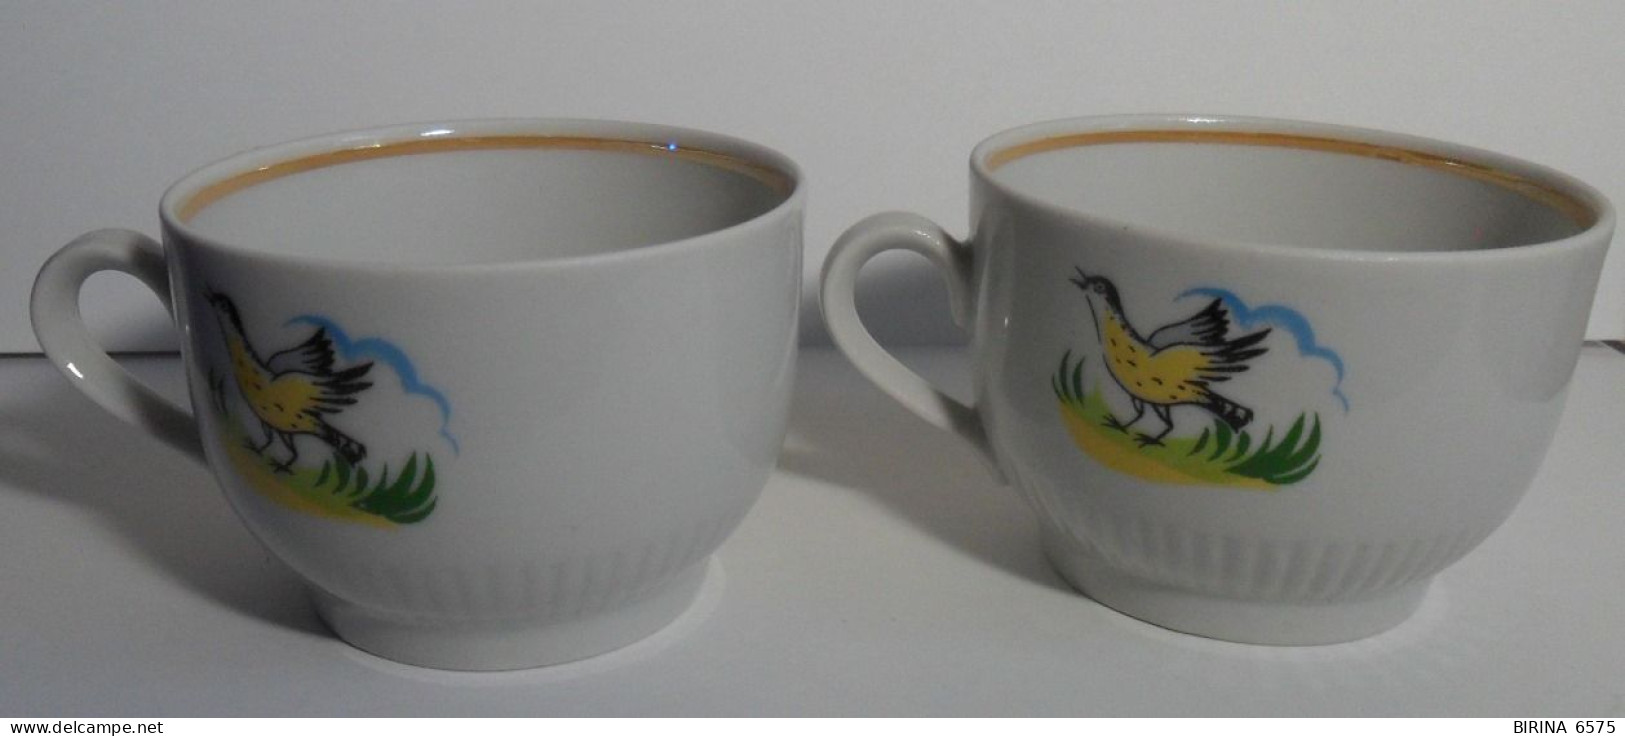 A Cup. The USSR. THE BRAND. PORCELAIN FACTORY PROLETARIAN. Lodge. Birdie. ONE LOT. - 11-52-i - Tazze